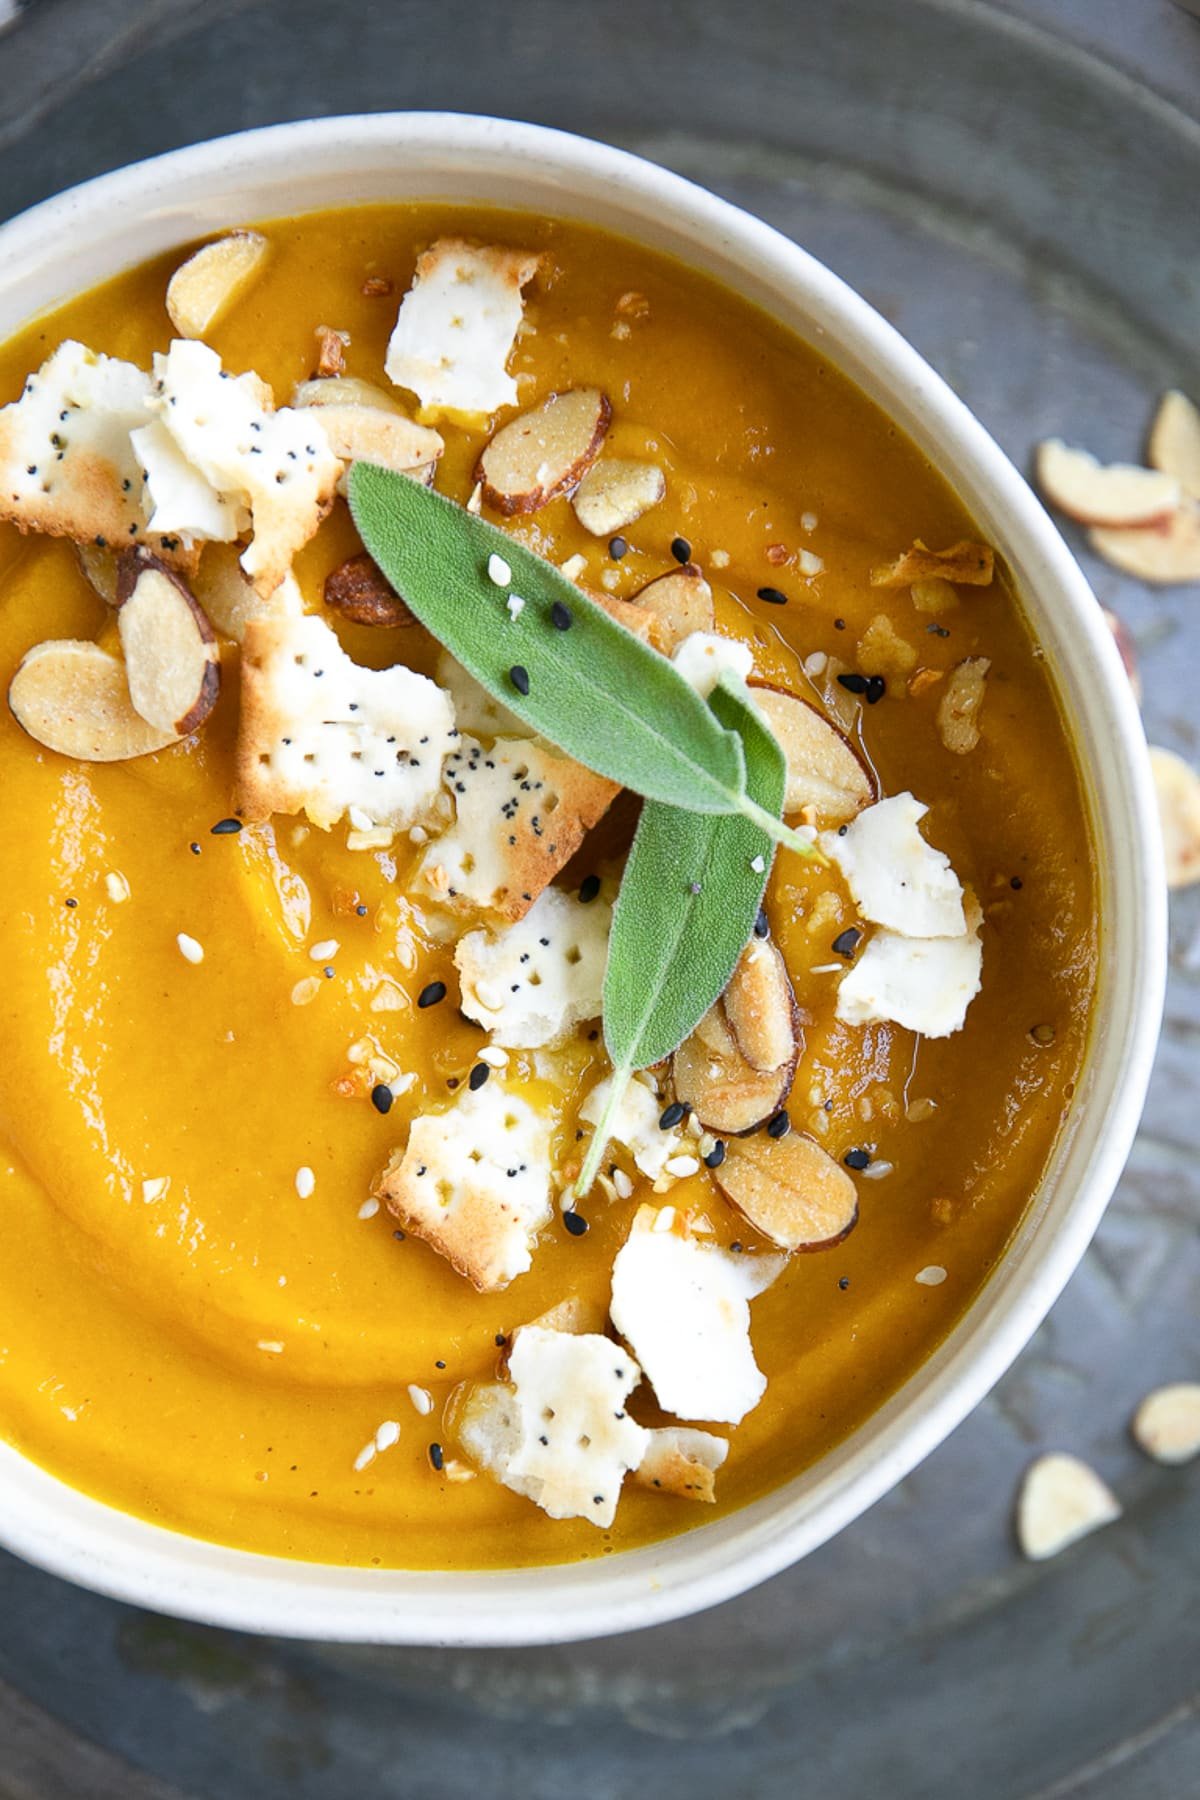 Bowl of acorn squash soup garnished with crackers, sesame seeds and fresh sage.